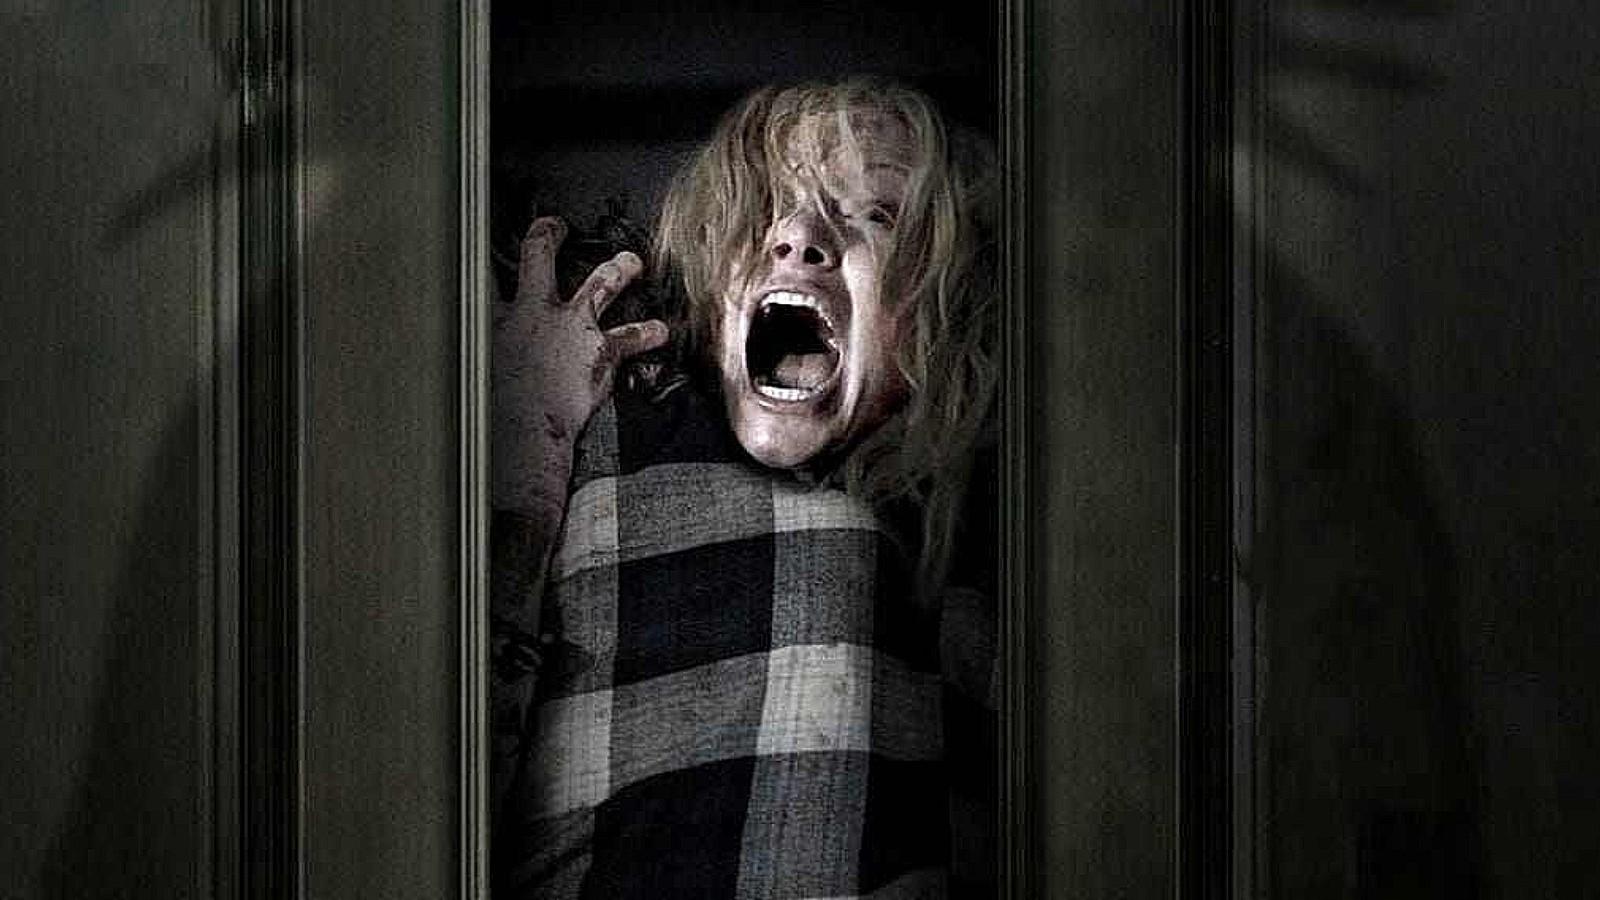 A still from The Babadook, one of the best horror movies on Amazon Prime